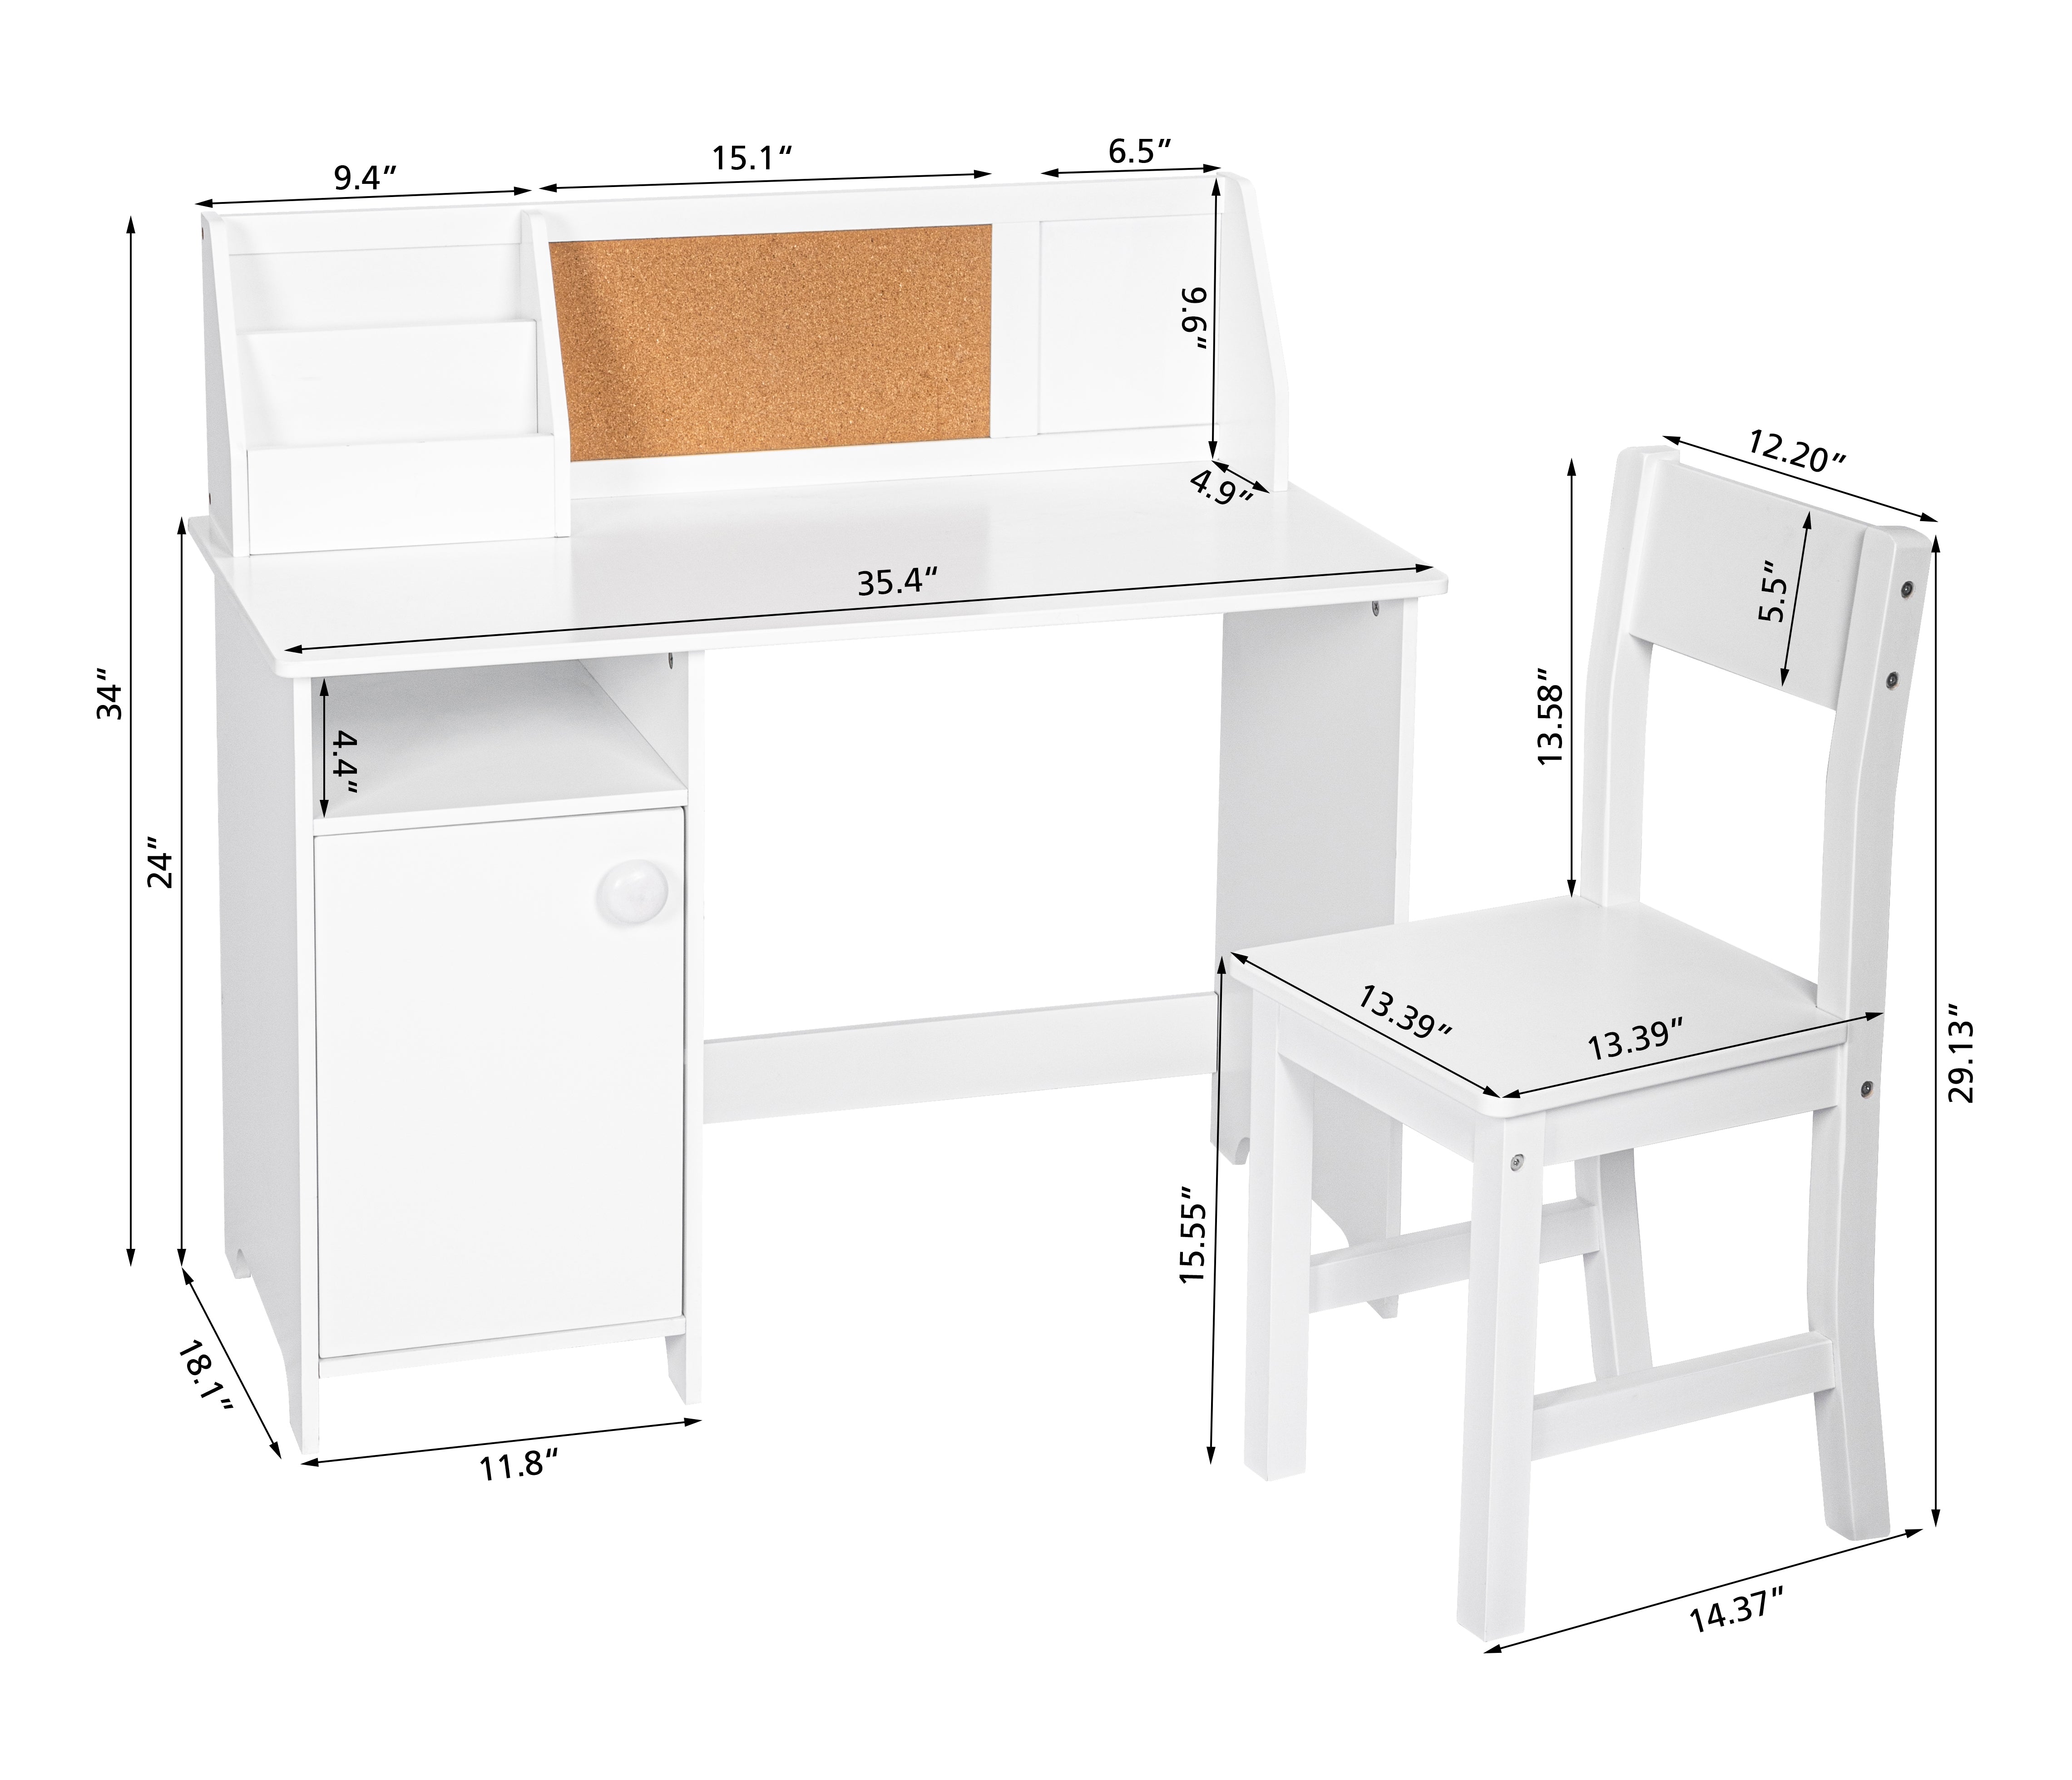 Utex Kids Desk and Chair Set, Study Desk for Kids with Storage Bins, Wooden Children Study Table, Student Writing Desk for Bedroom & Study Room, White